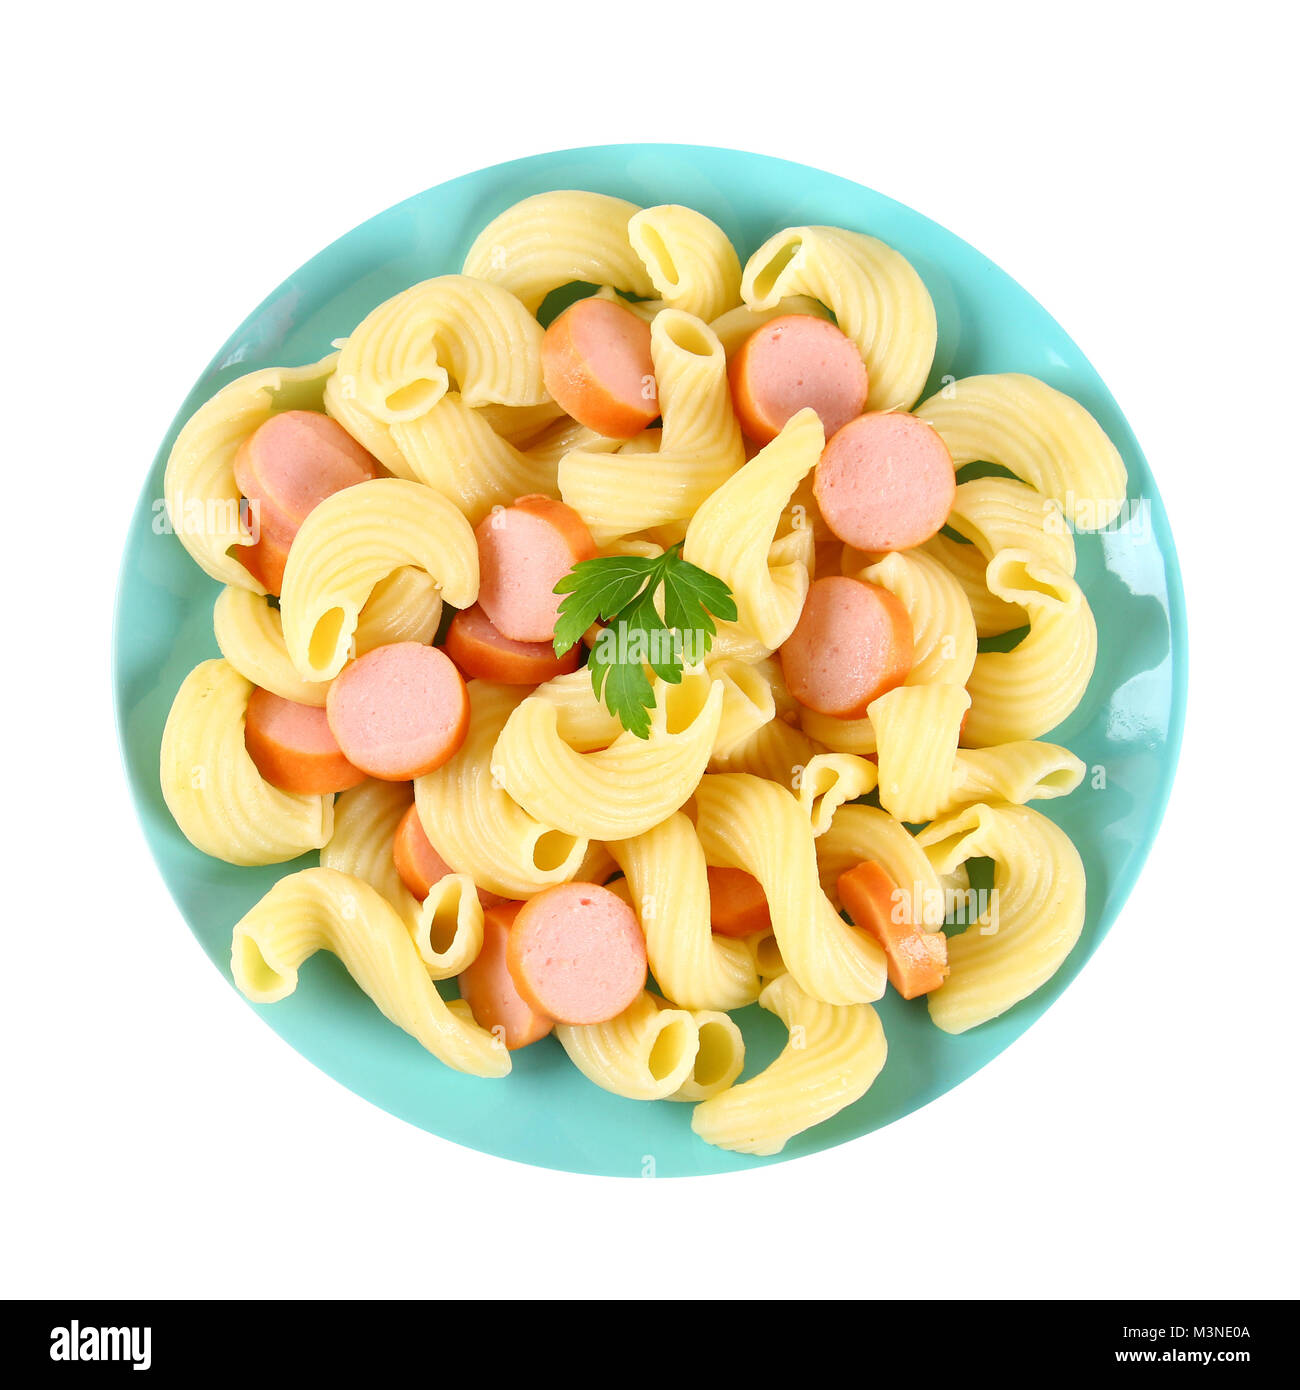 Macaroni with sausages on a blue plate isolated on white background Stock Photo